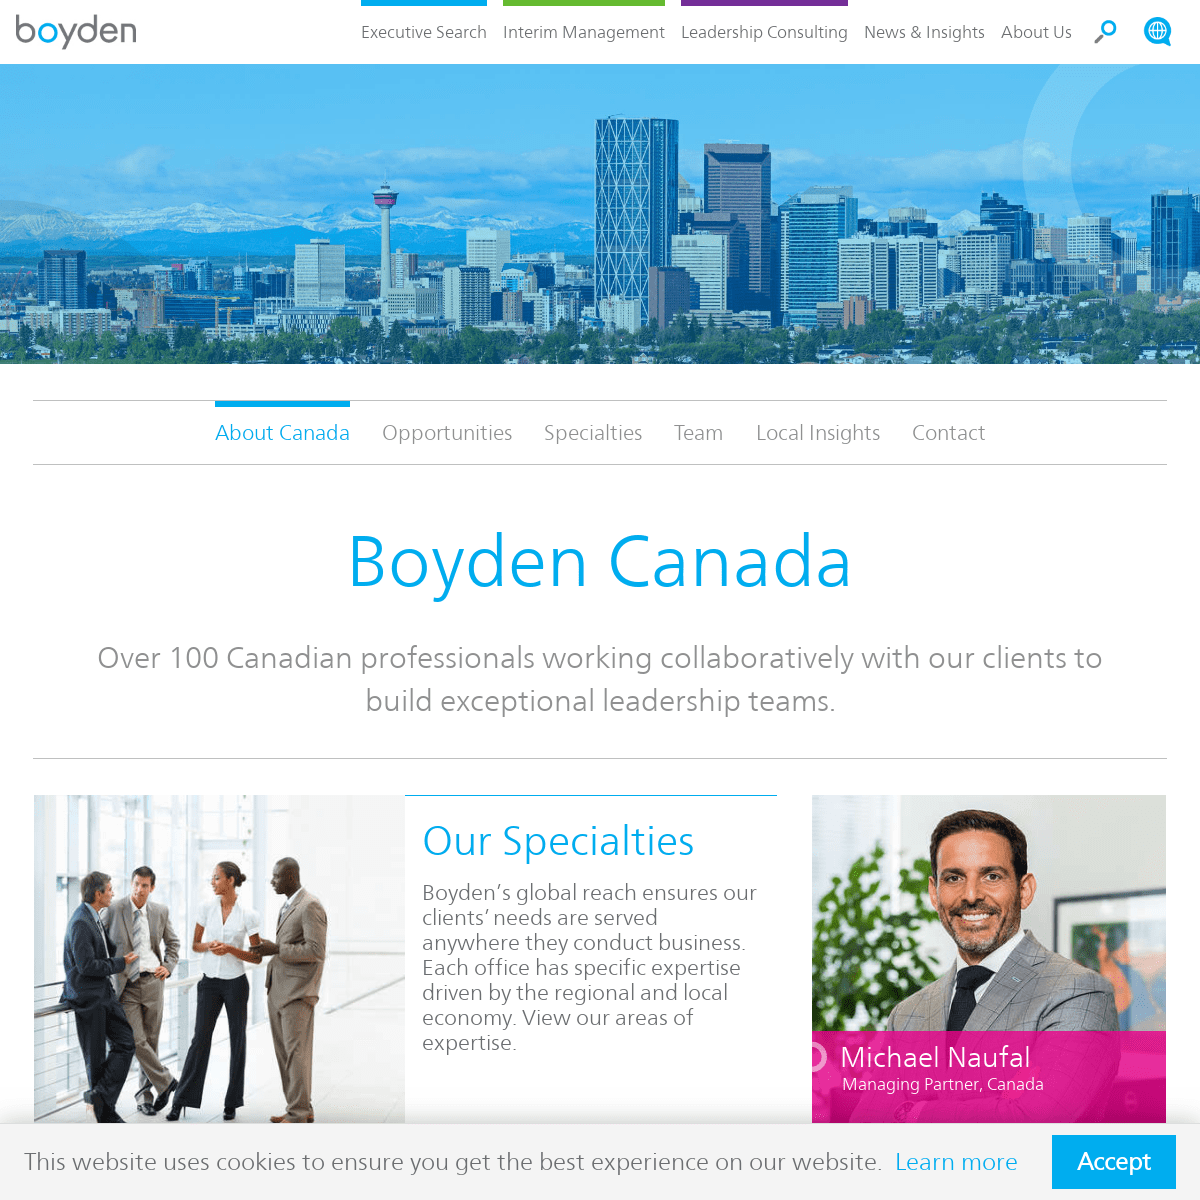 A complete backup of boyden.ca